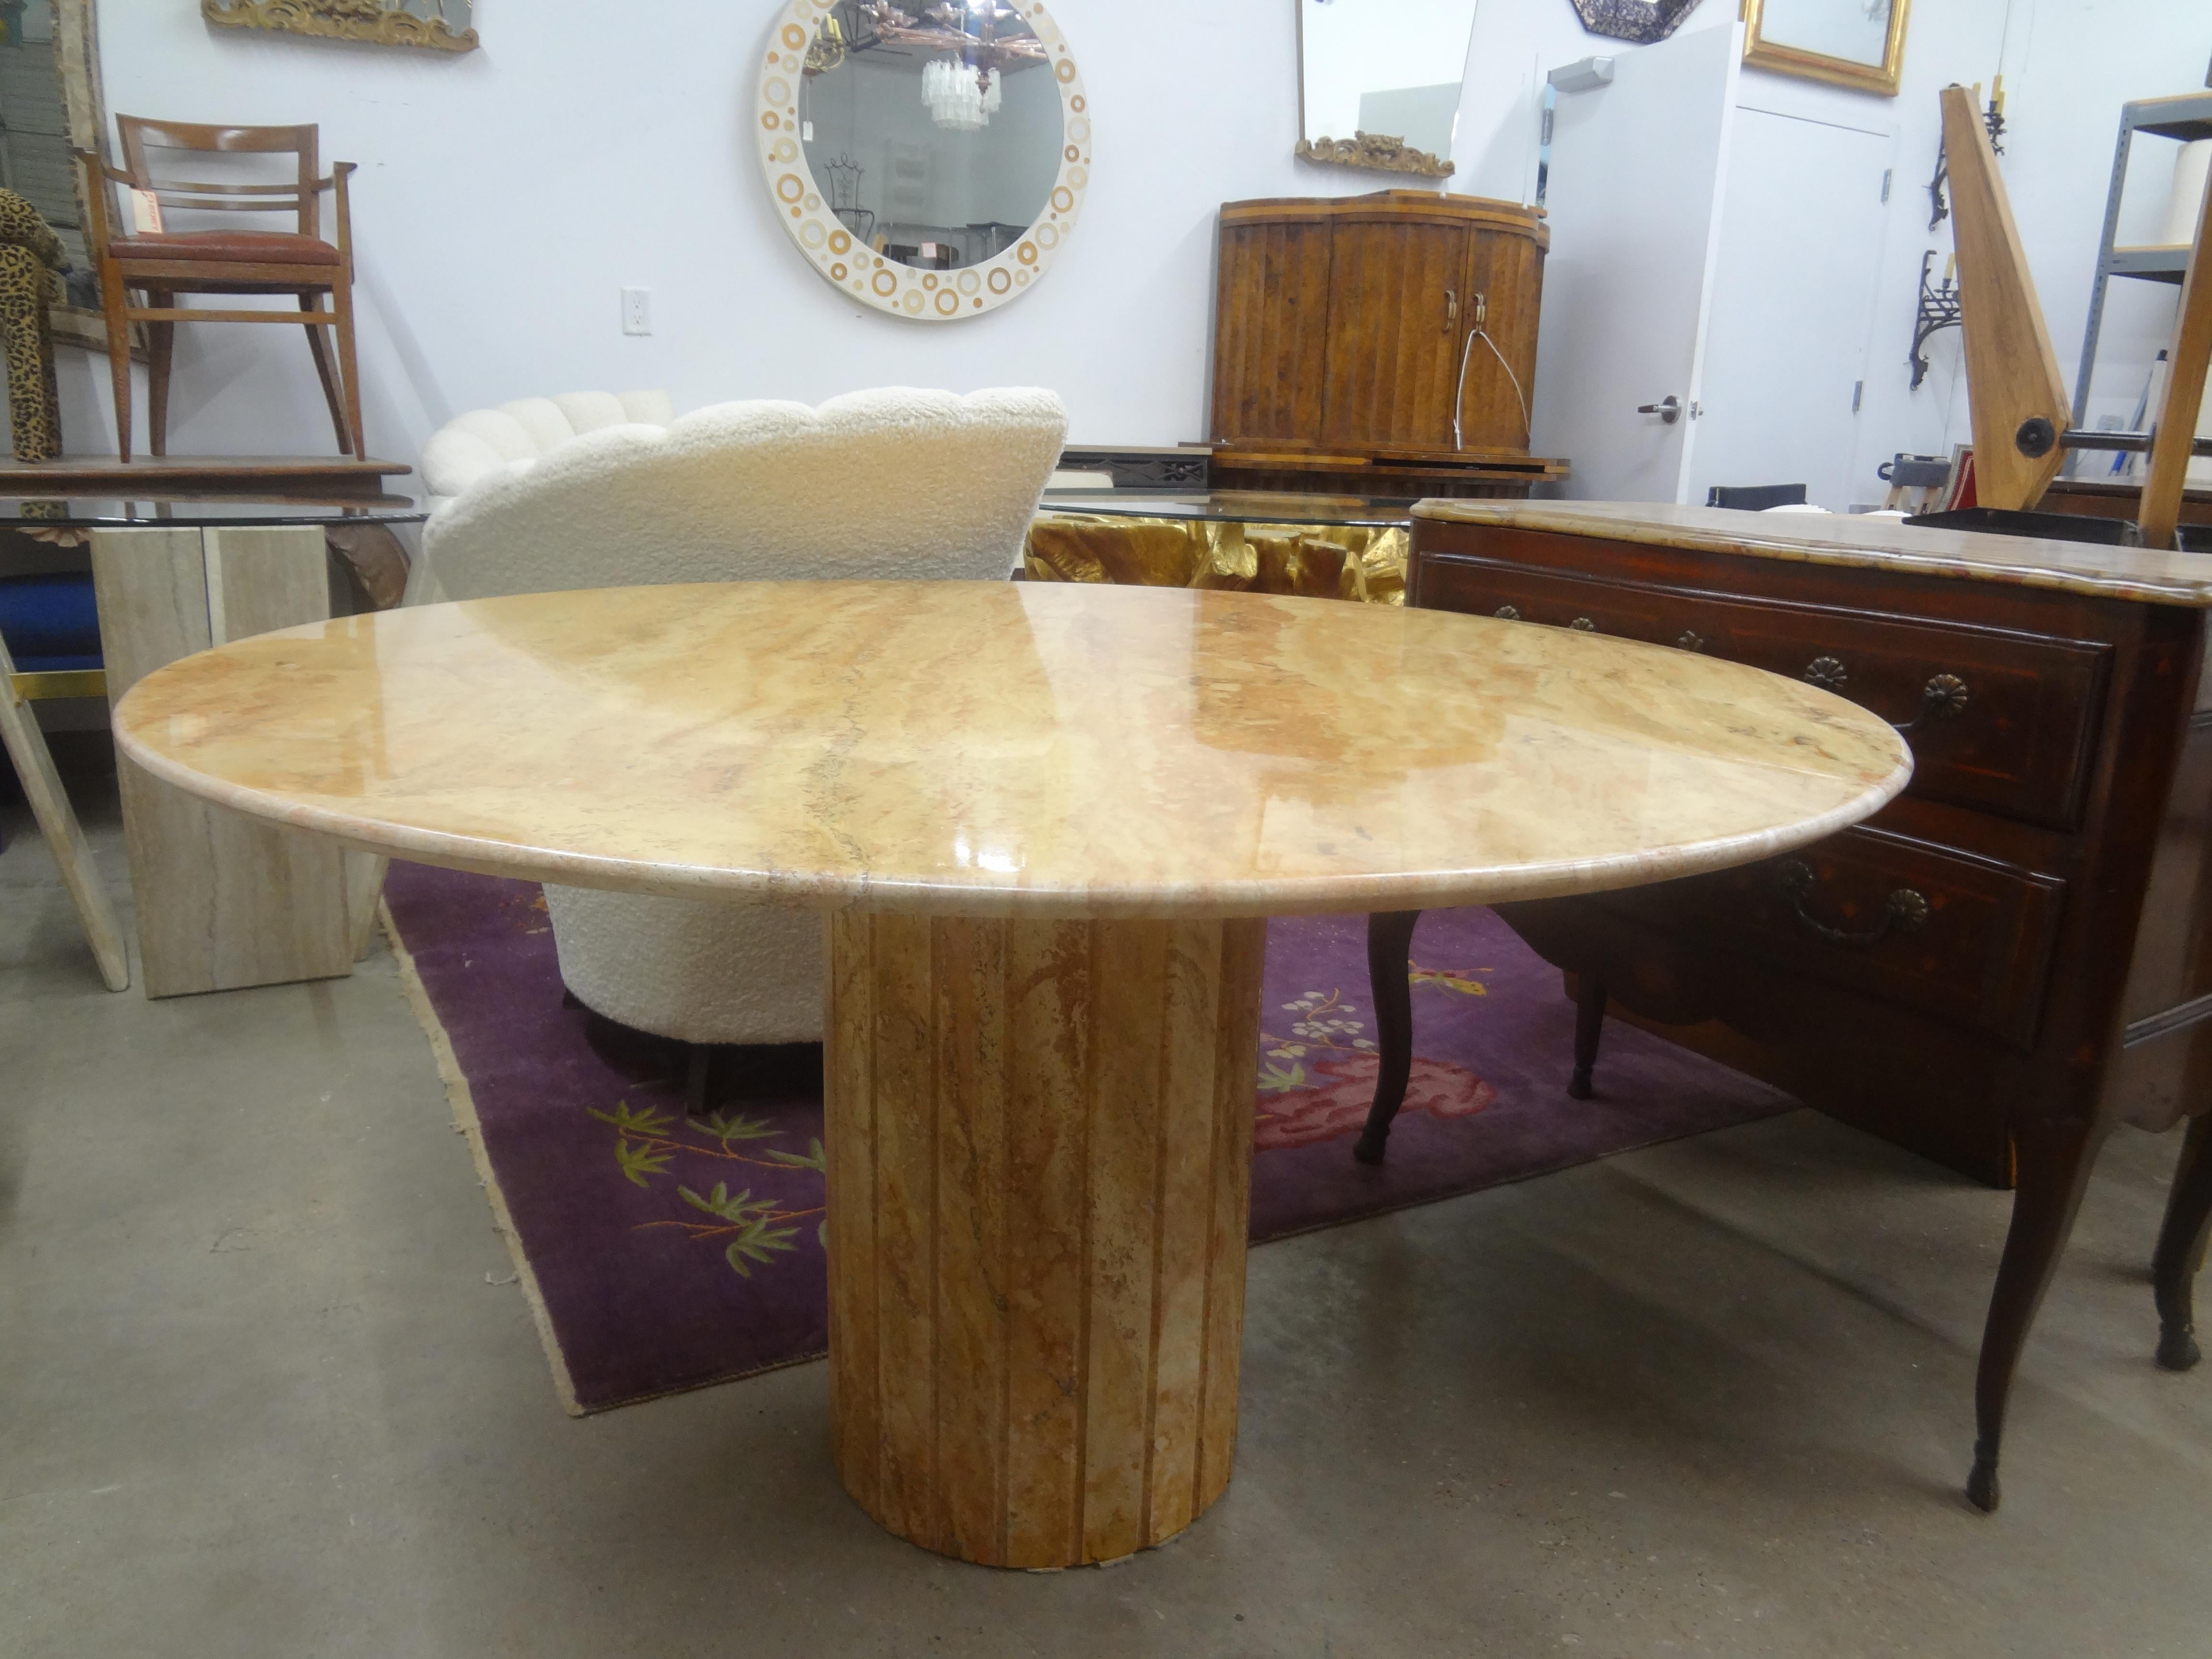 Post Modern Italian Marble Center Table.
This large Italian Mario Bellini style (51 inch) marble table can be used as a center table or dining table.
Most unusual colored marble.
Stunning!